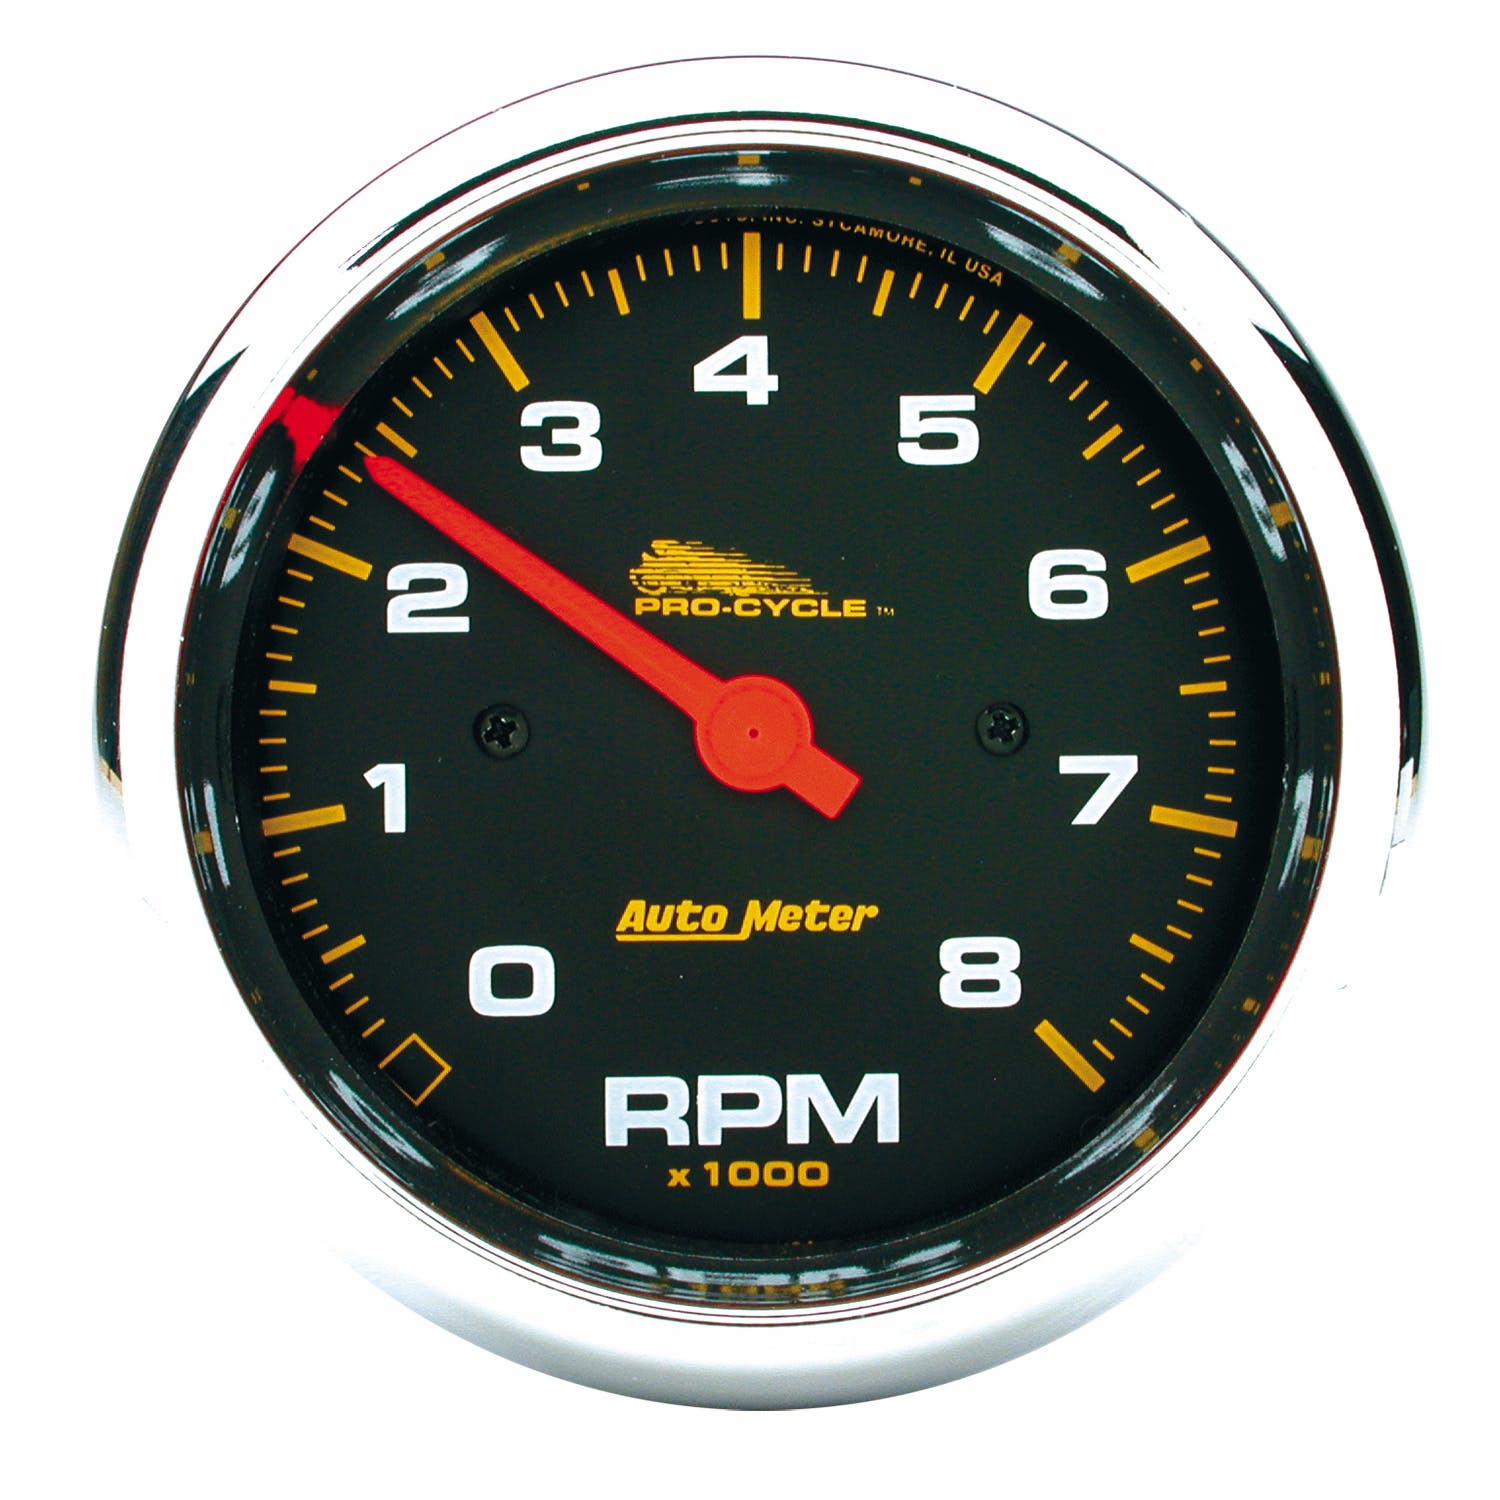 AutoMeter Products 19300 Tachometer Gauge, Black-Pro Cycle 3 3/4, 8K RPM, 2and4 Cylinder